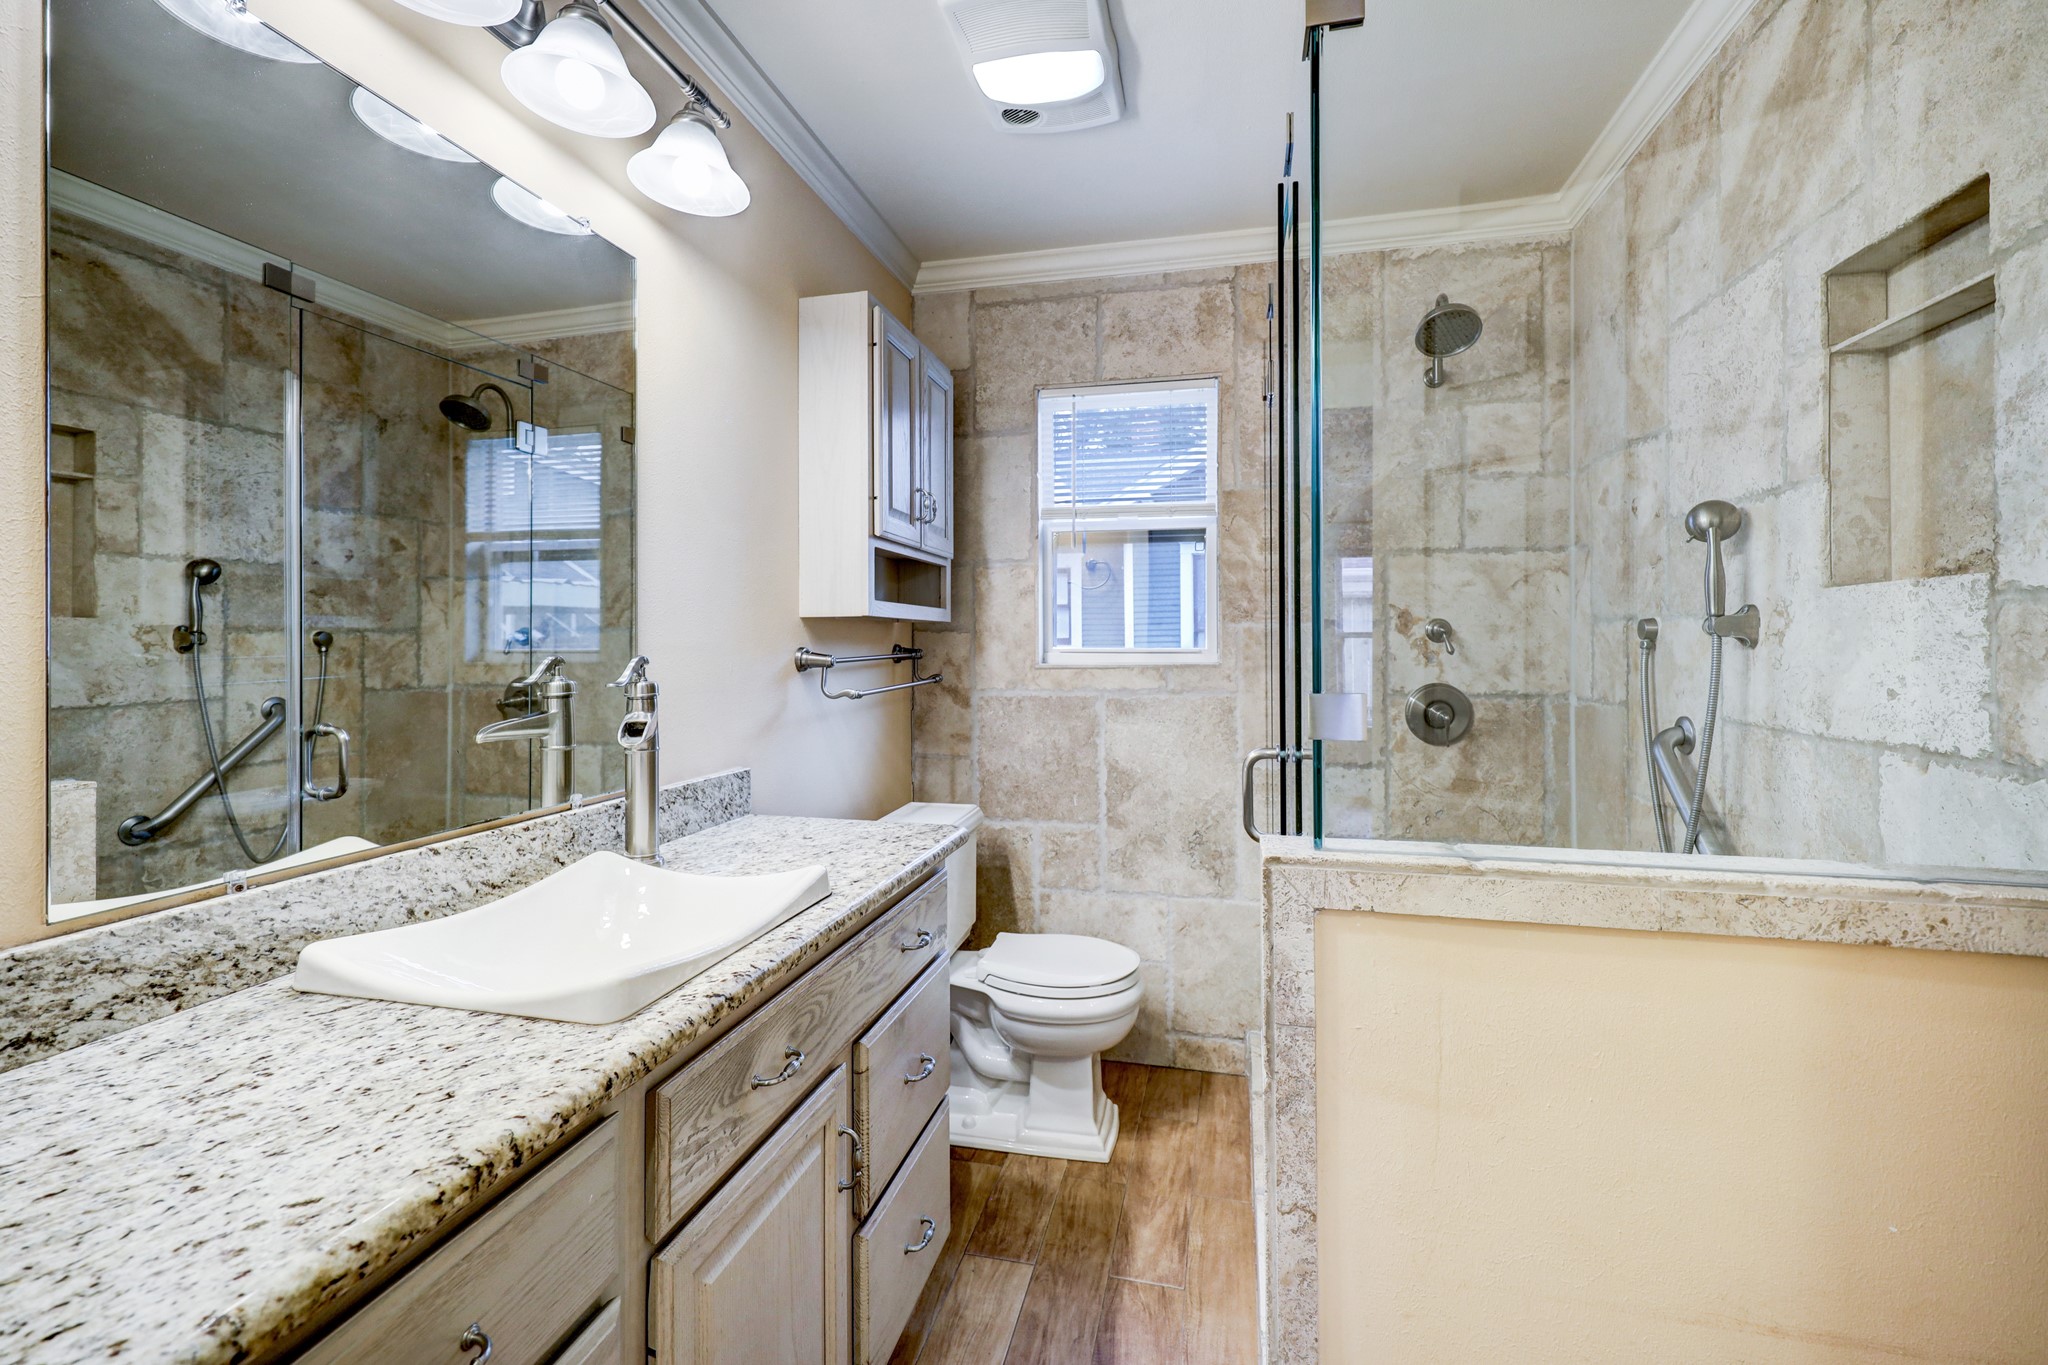 BATHROOM- bath features walk in shower and room for double sinks.